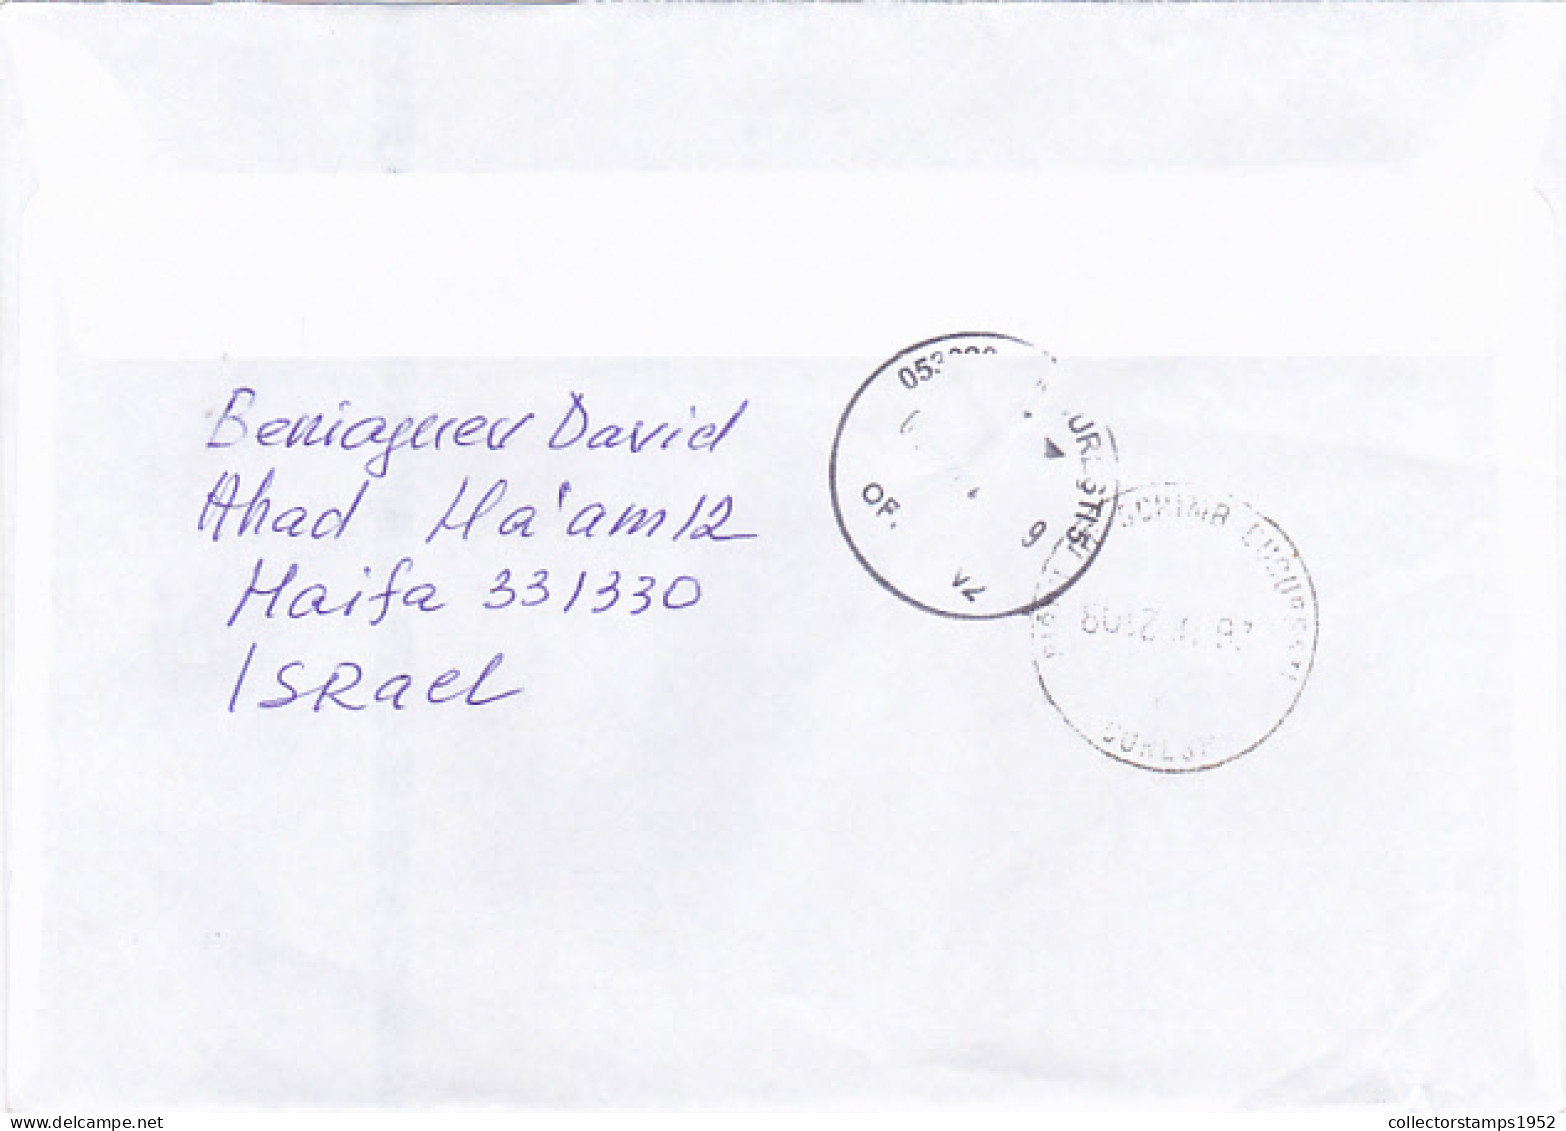 TRADE UNION, ROSES, FINE STAMPS ON REGISTERED COVER, 2021, ISRAEL - Covers & Documents